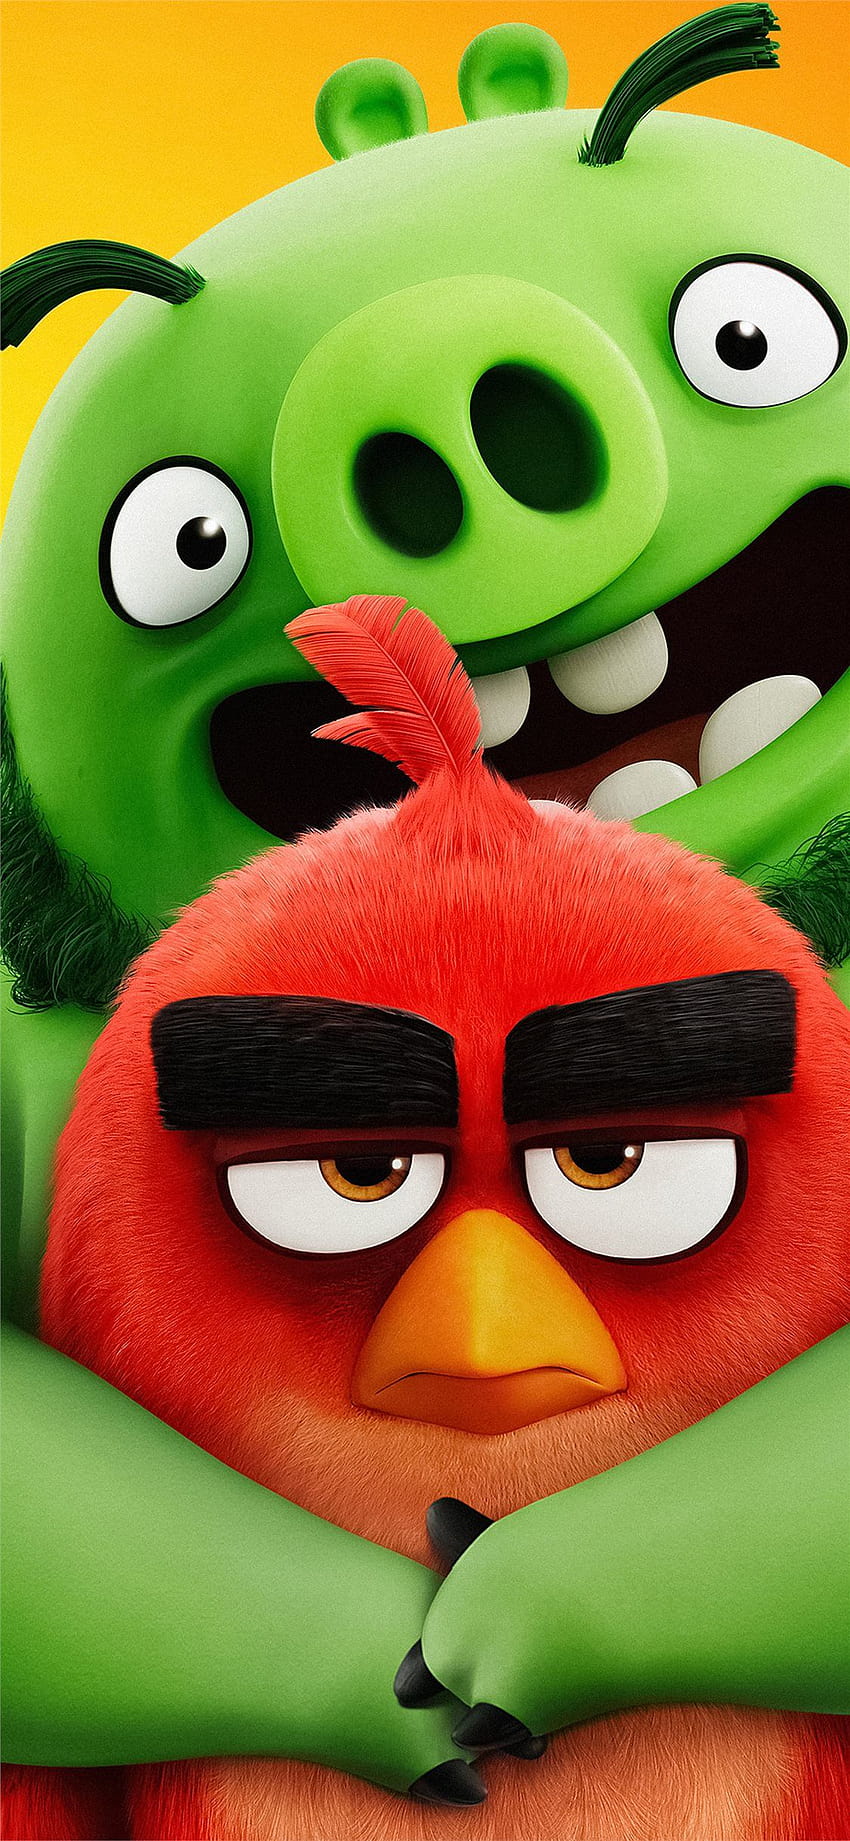 Angry Birds 2 posted by Christopher Tremblay, angry birds red for mobile HD phone wallpaper